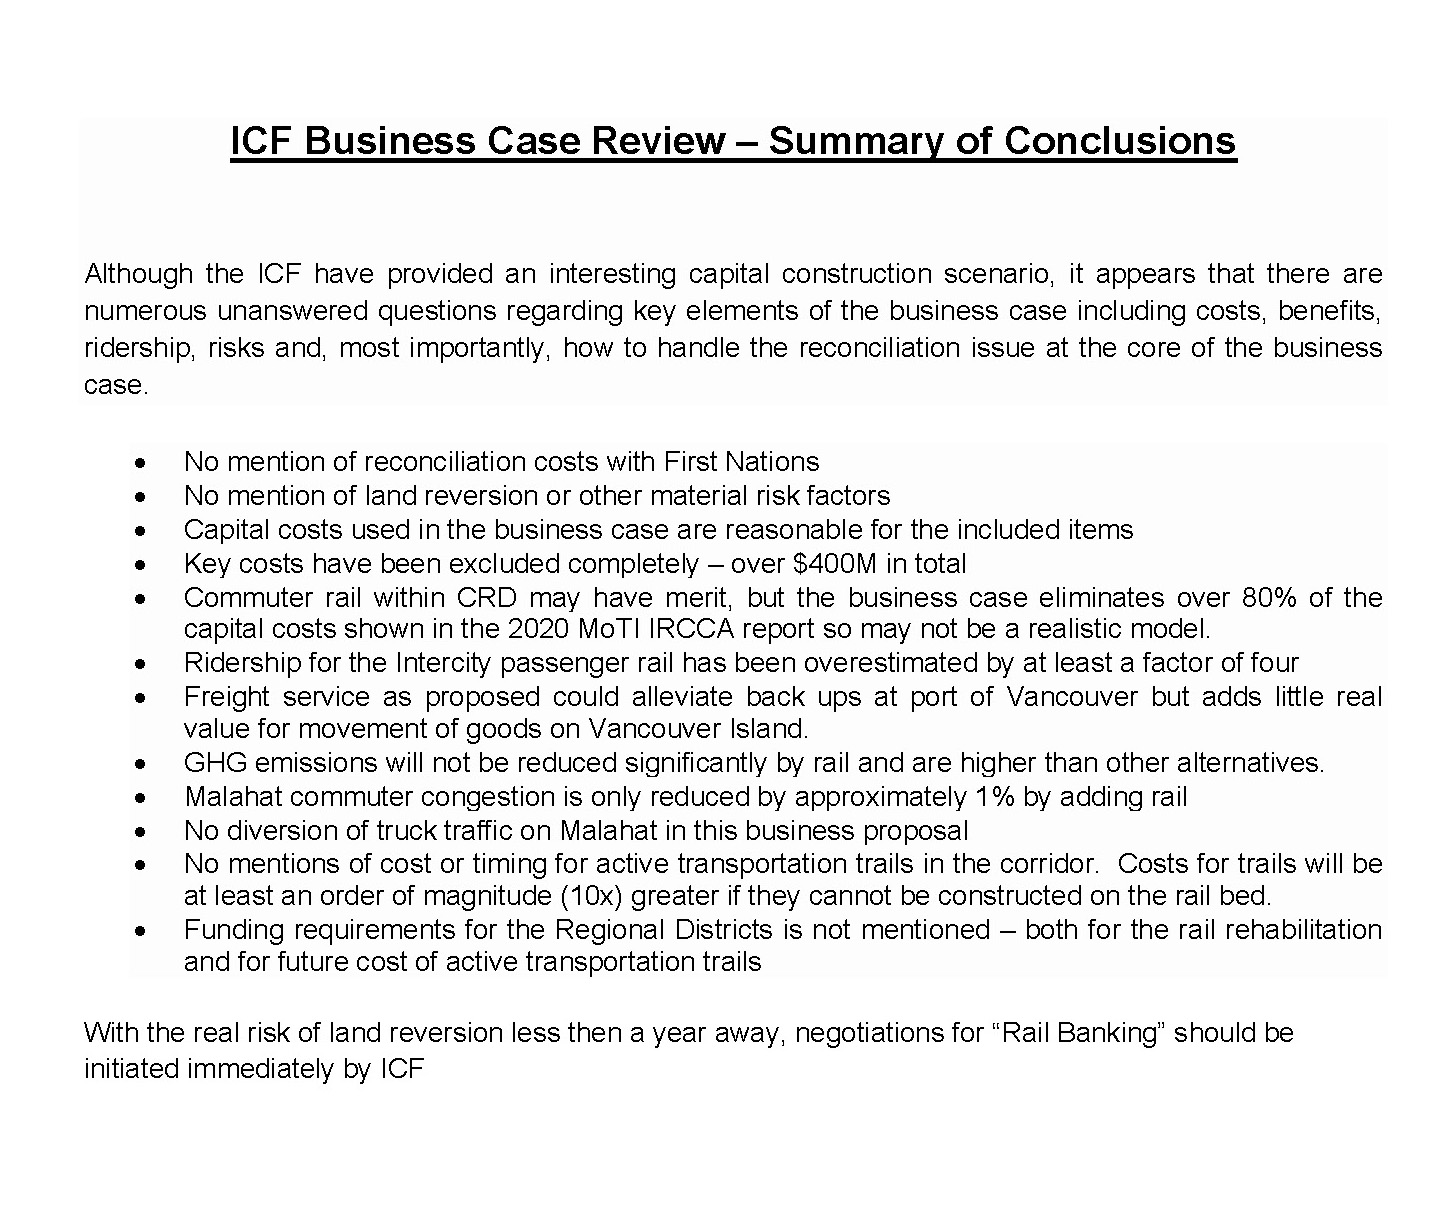 ICF-Business-Case-review-summary